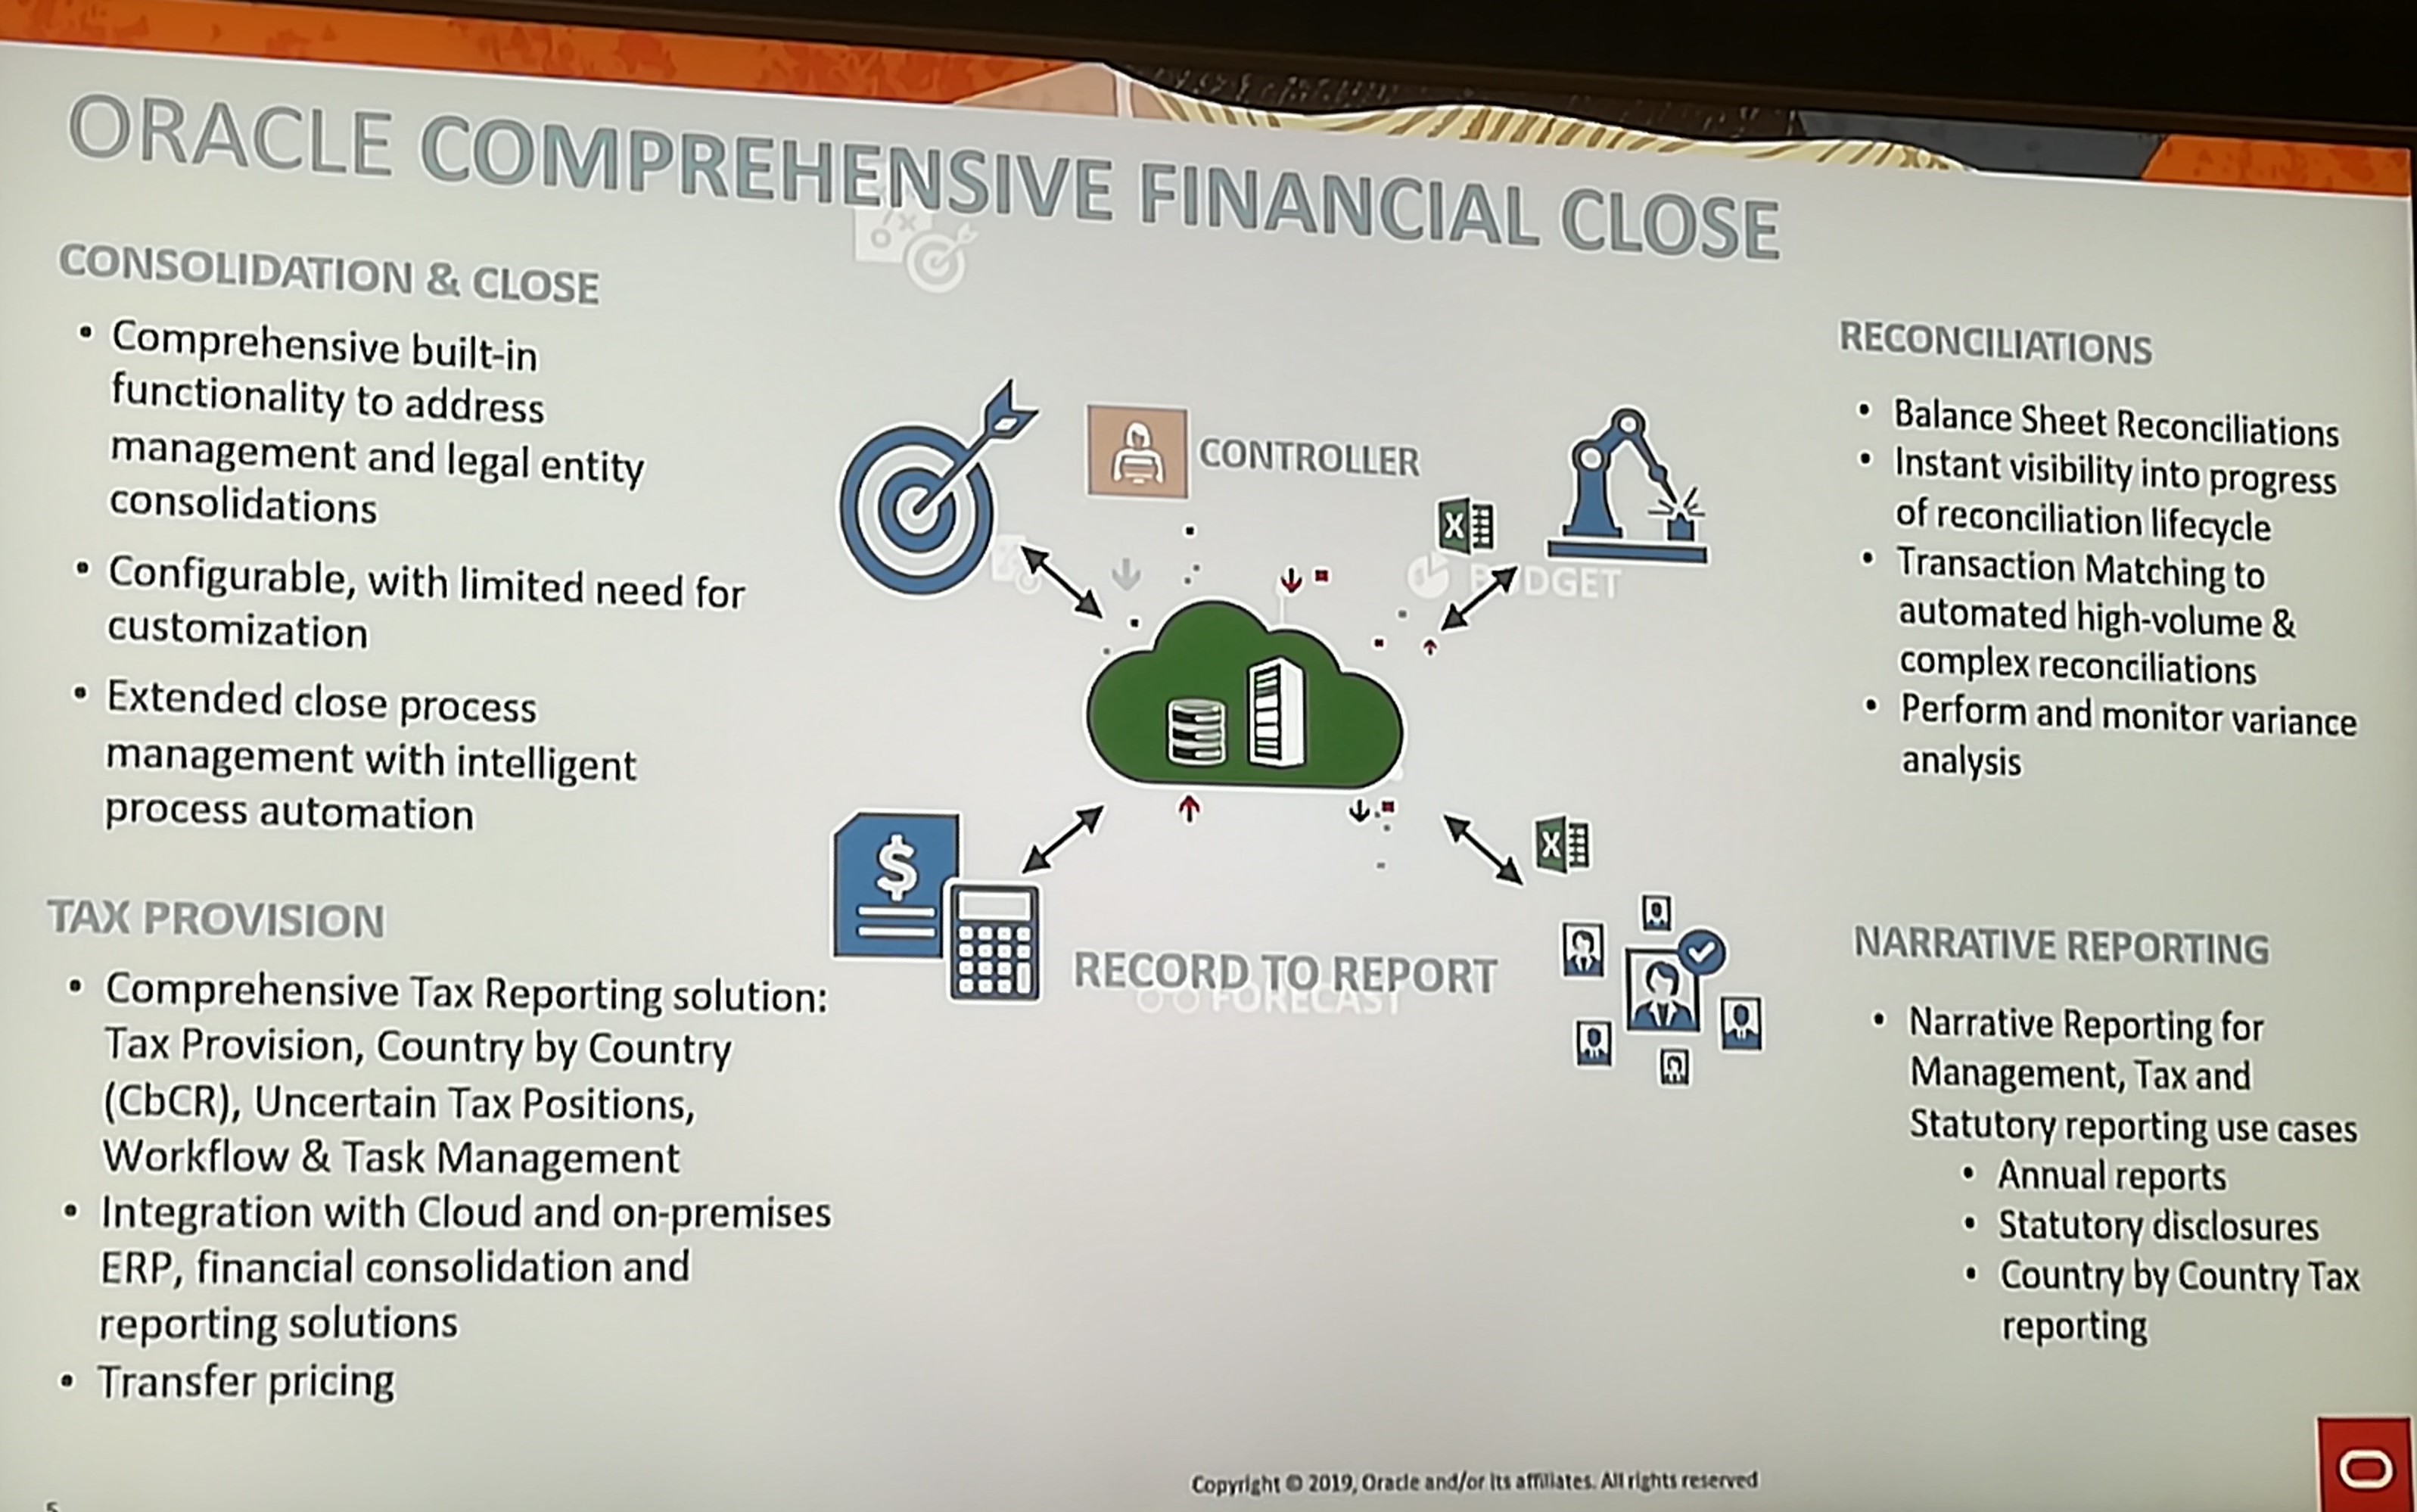 Oracle Open World 2019 - Oracle Comprehensive Financial Close